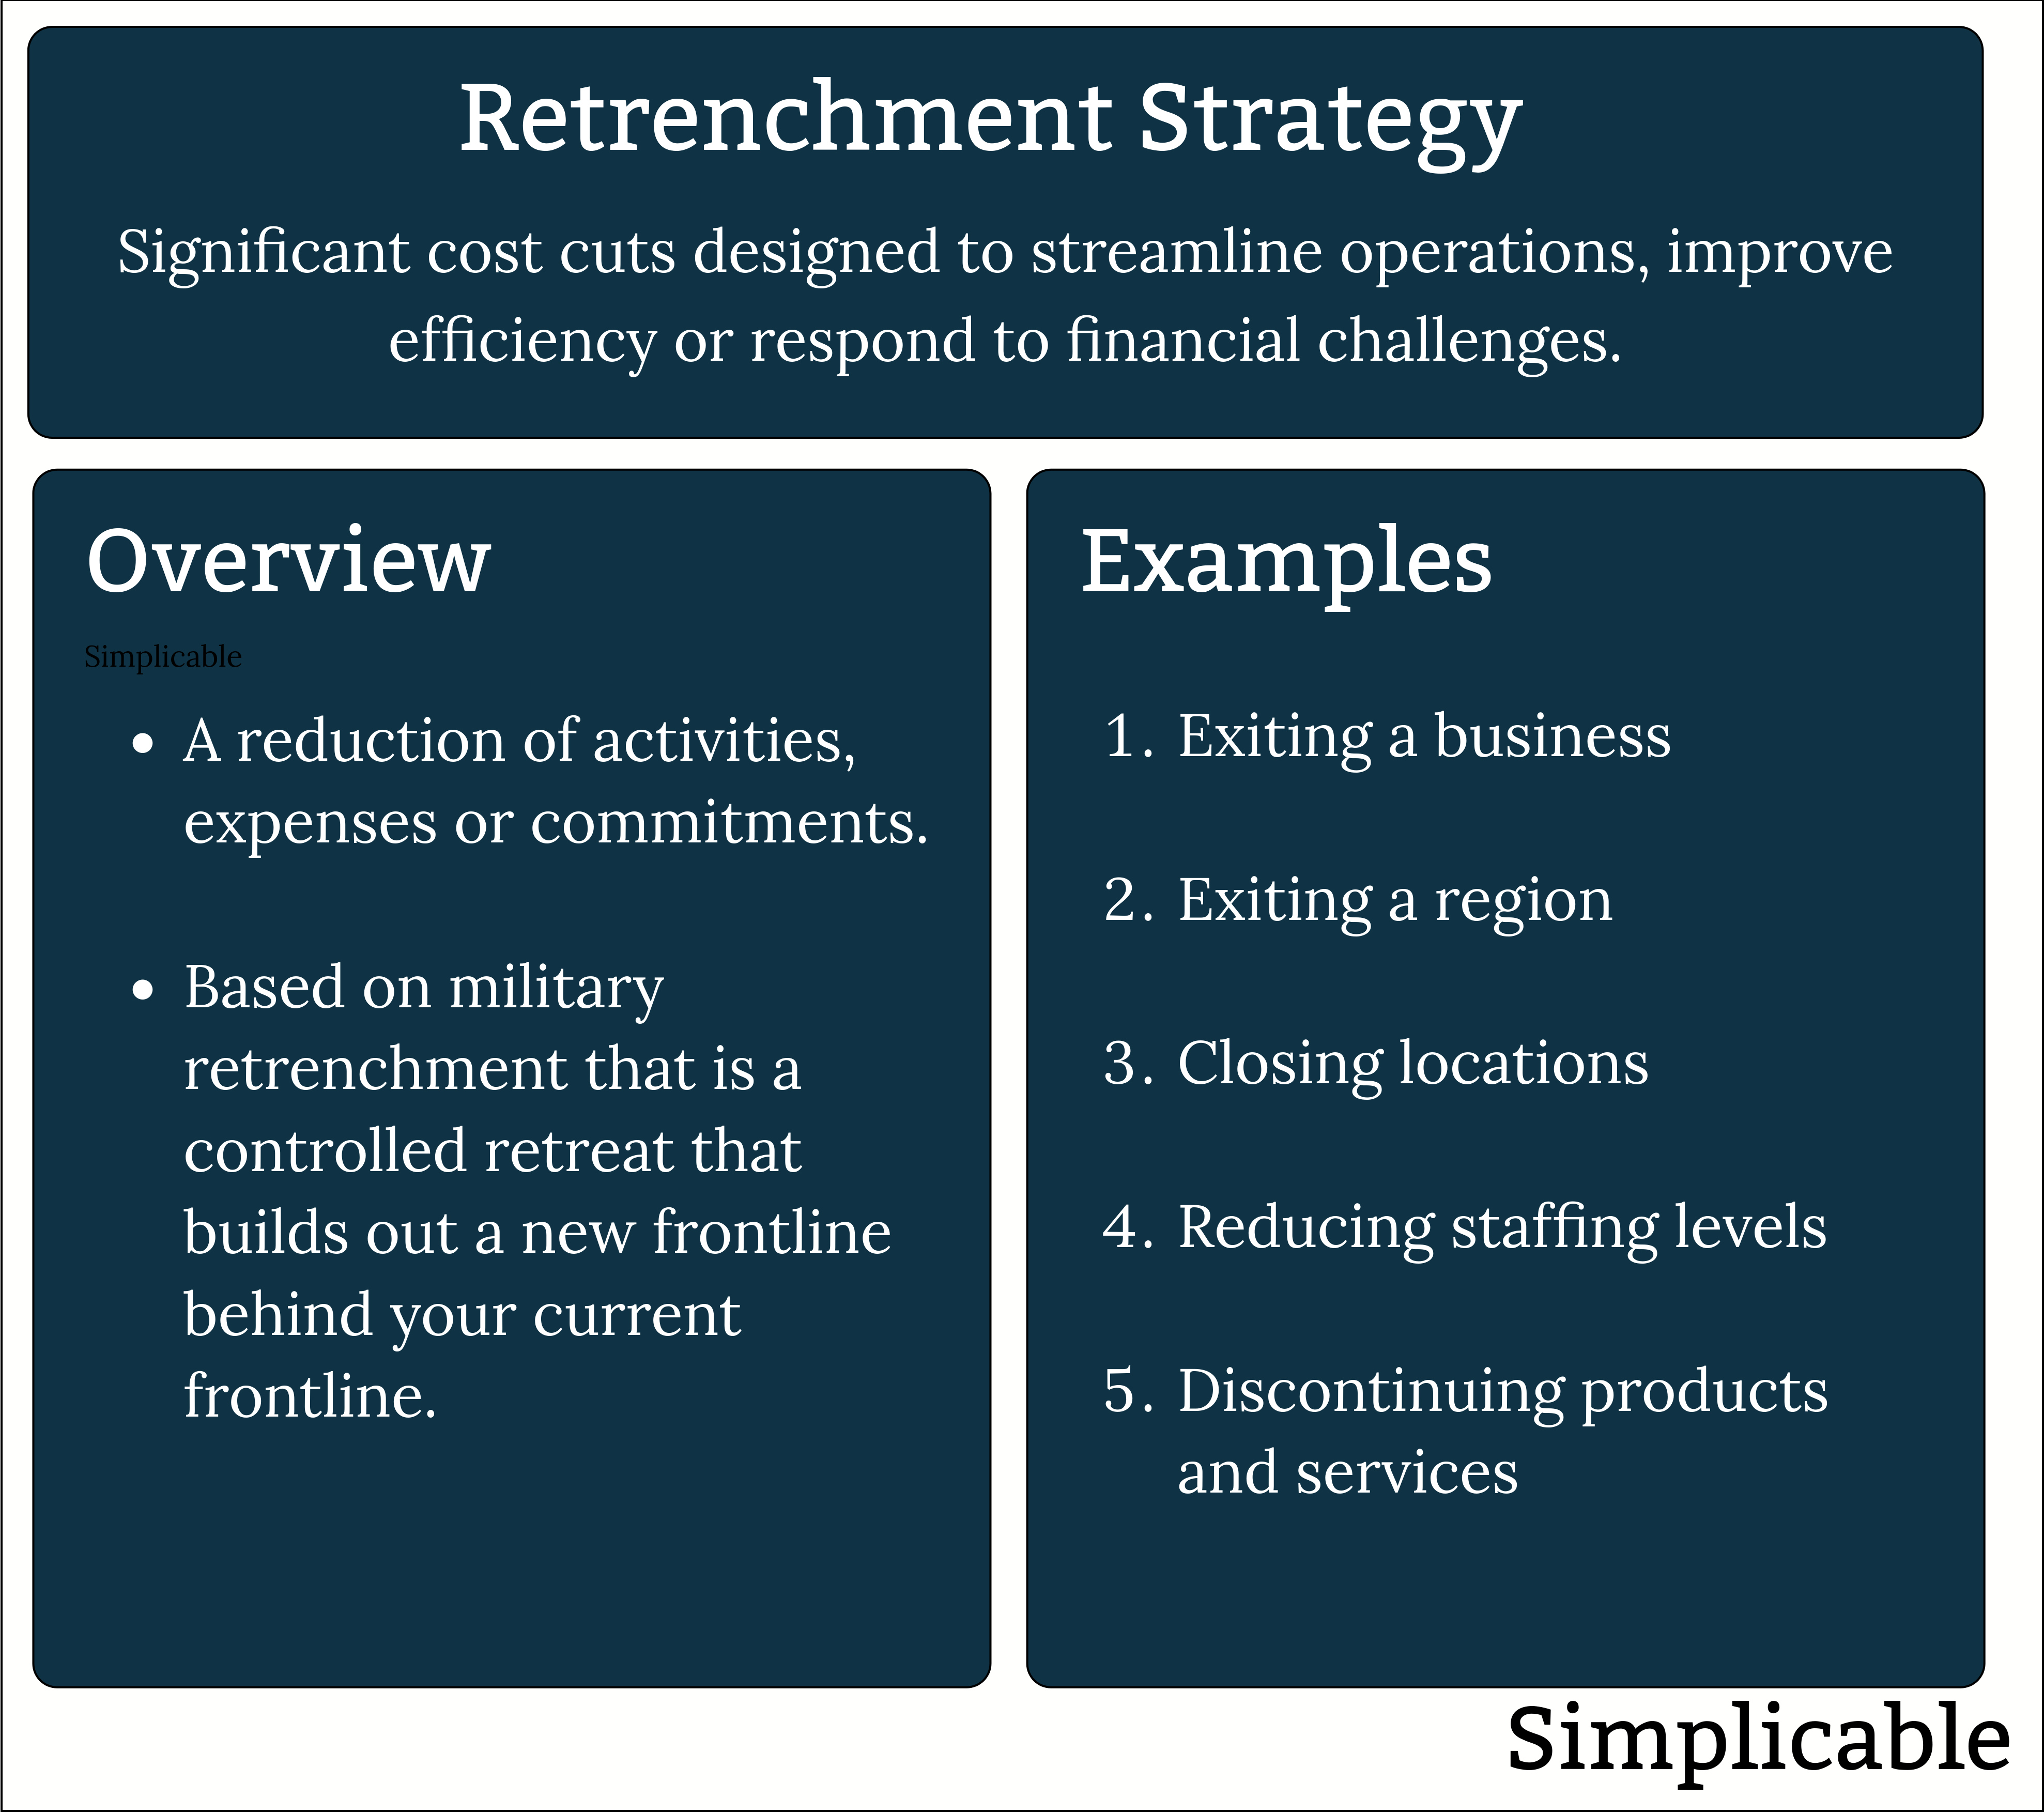 retrenchment definition and examples